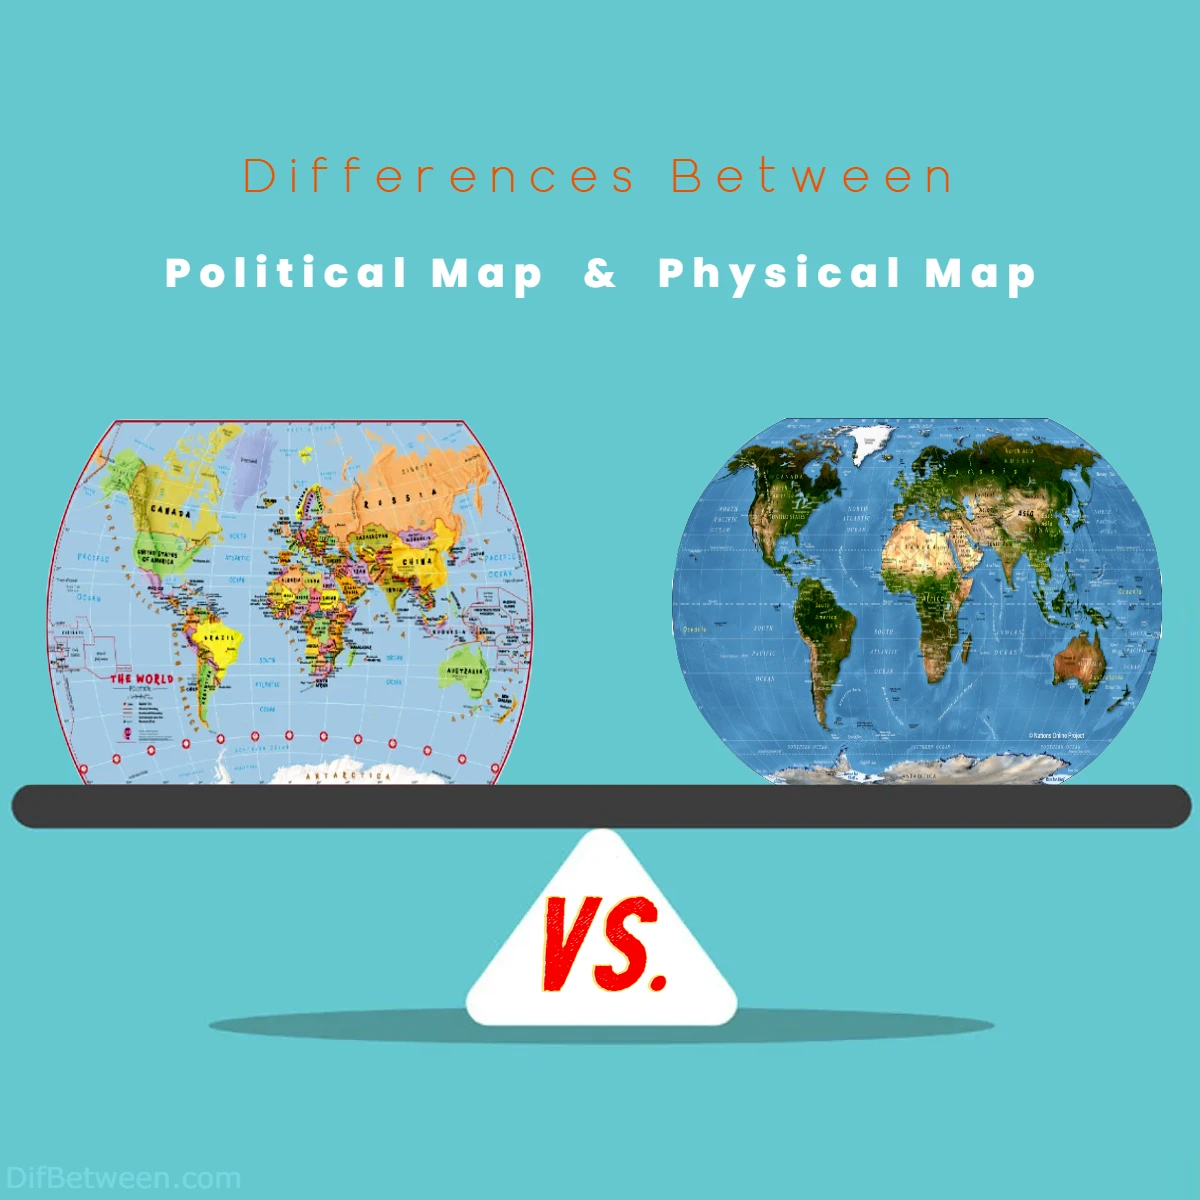 Differences Between Political Map vs Physical Map